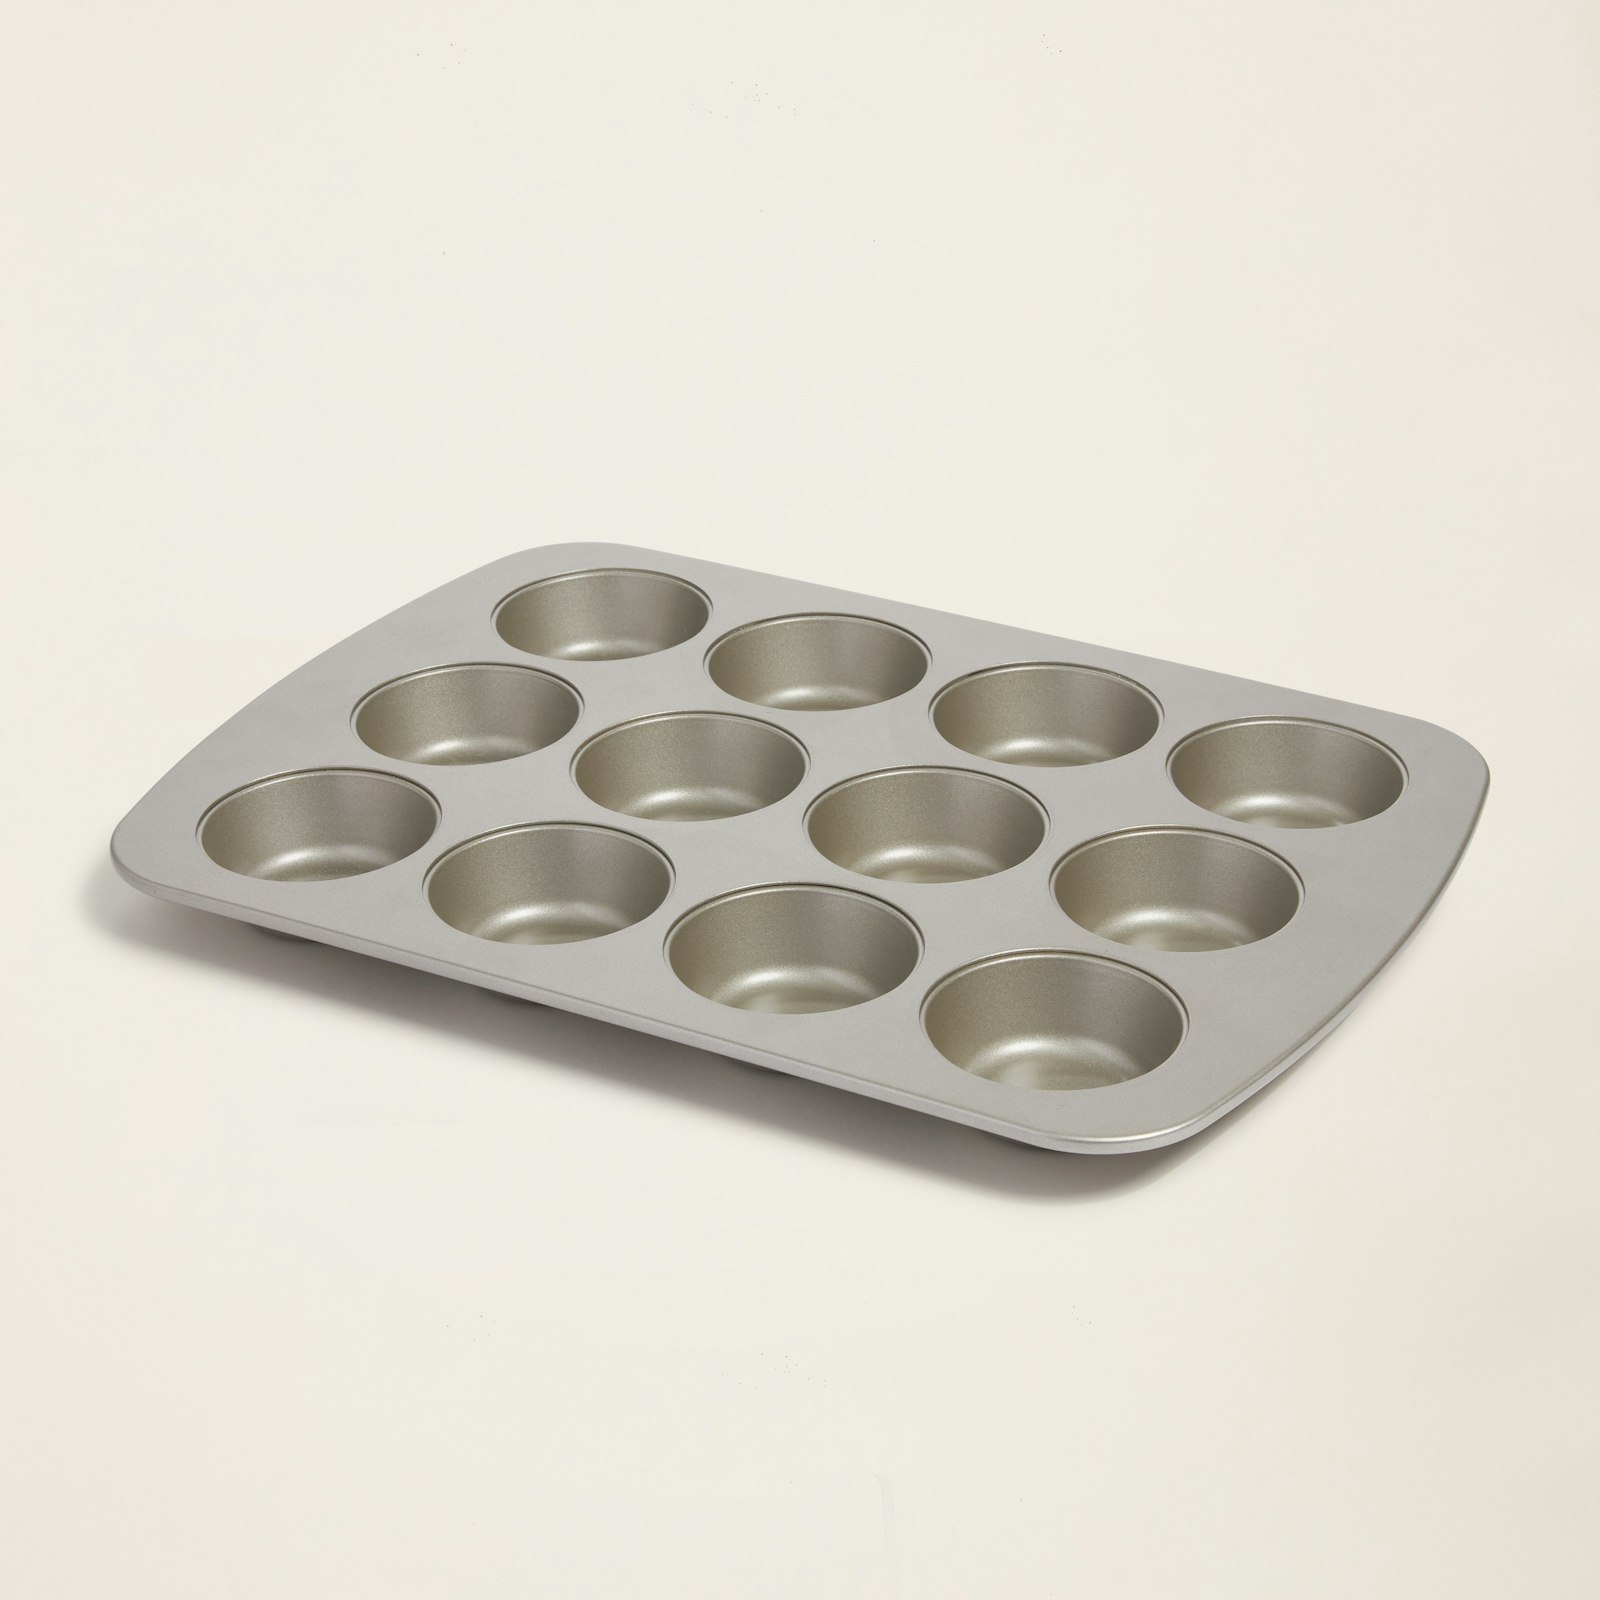 ZestMuffinTins_Silver_12Count_2Set_Product_1x1_0156.jpg